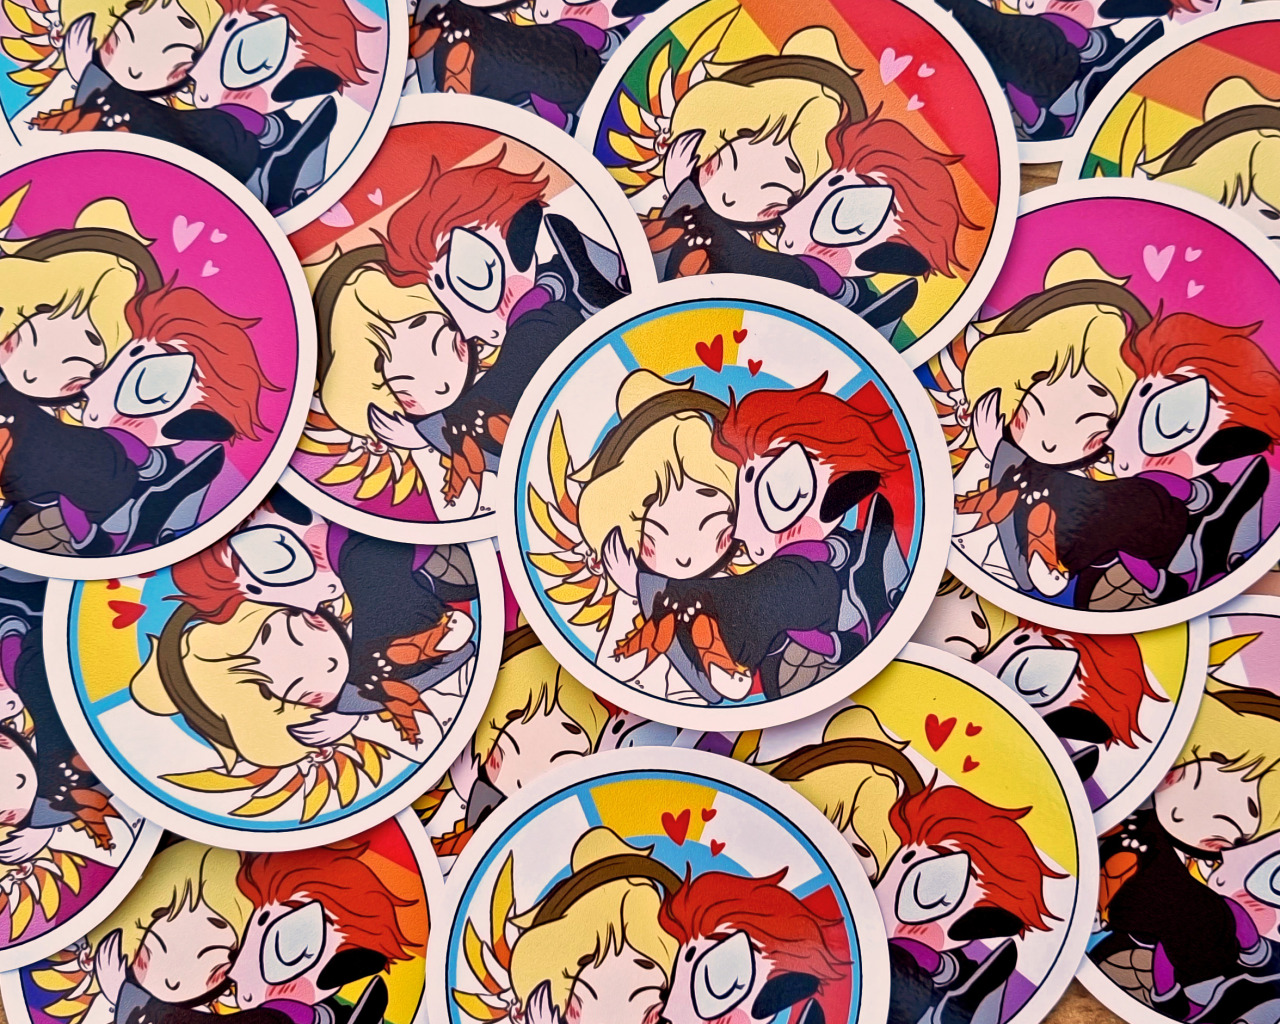 On the subject of stickers, I also have Moicy stickers up on my Etsy shop! So you can look at Moira and Angela being cute as much as I do 🥺  available in OW colours, or a collection of LGBT pride flags just in time for pride month 🏳️‍🌈😚 #moicy #I still love them so much #moira#moira overwatch#angela ziegler#mercy overwatch#overwatch2#Overwatch#mercy#mercy fanart#moira fanart#moira odeorain#Fanart#video games#stickers#etsy shop#etsy seller#gay pride#pride month#wlw#lesbian#transgender#nonbinary#Bisexual#gay#ow#ow2